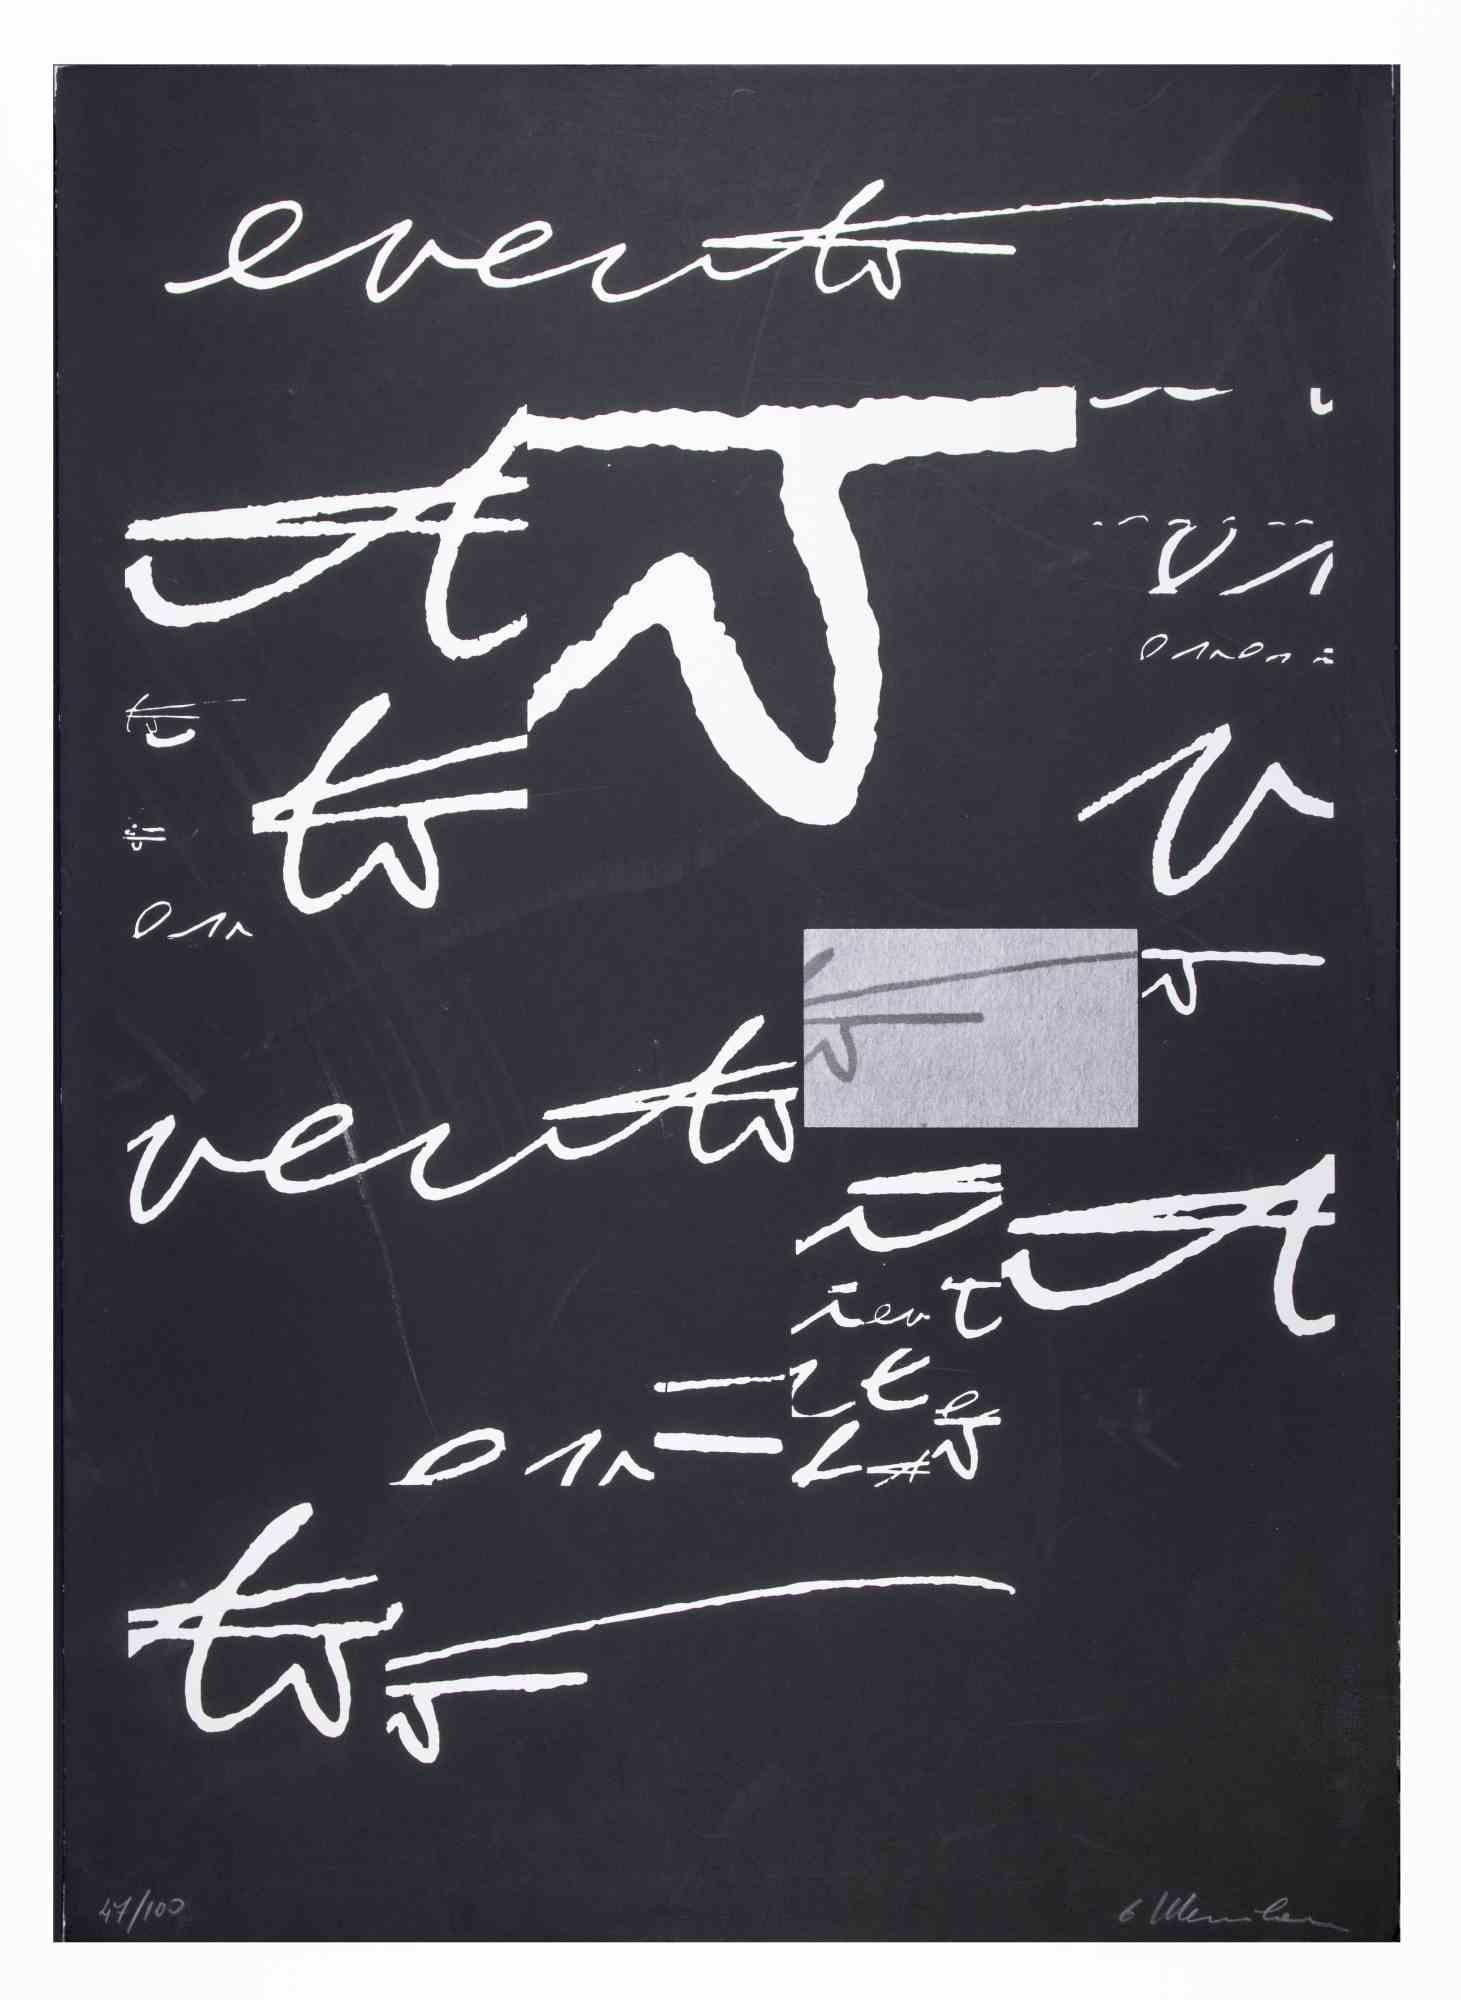 Abstract Composition is an Original Screen Print realized by Plinio Mesciulam in 1973.

Very good condition on a black cardboard.

Hand-signed and numbered by the artist on the lower margin.

Limite edition n.47 of 100 copies, editor " La nuova